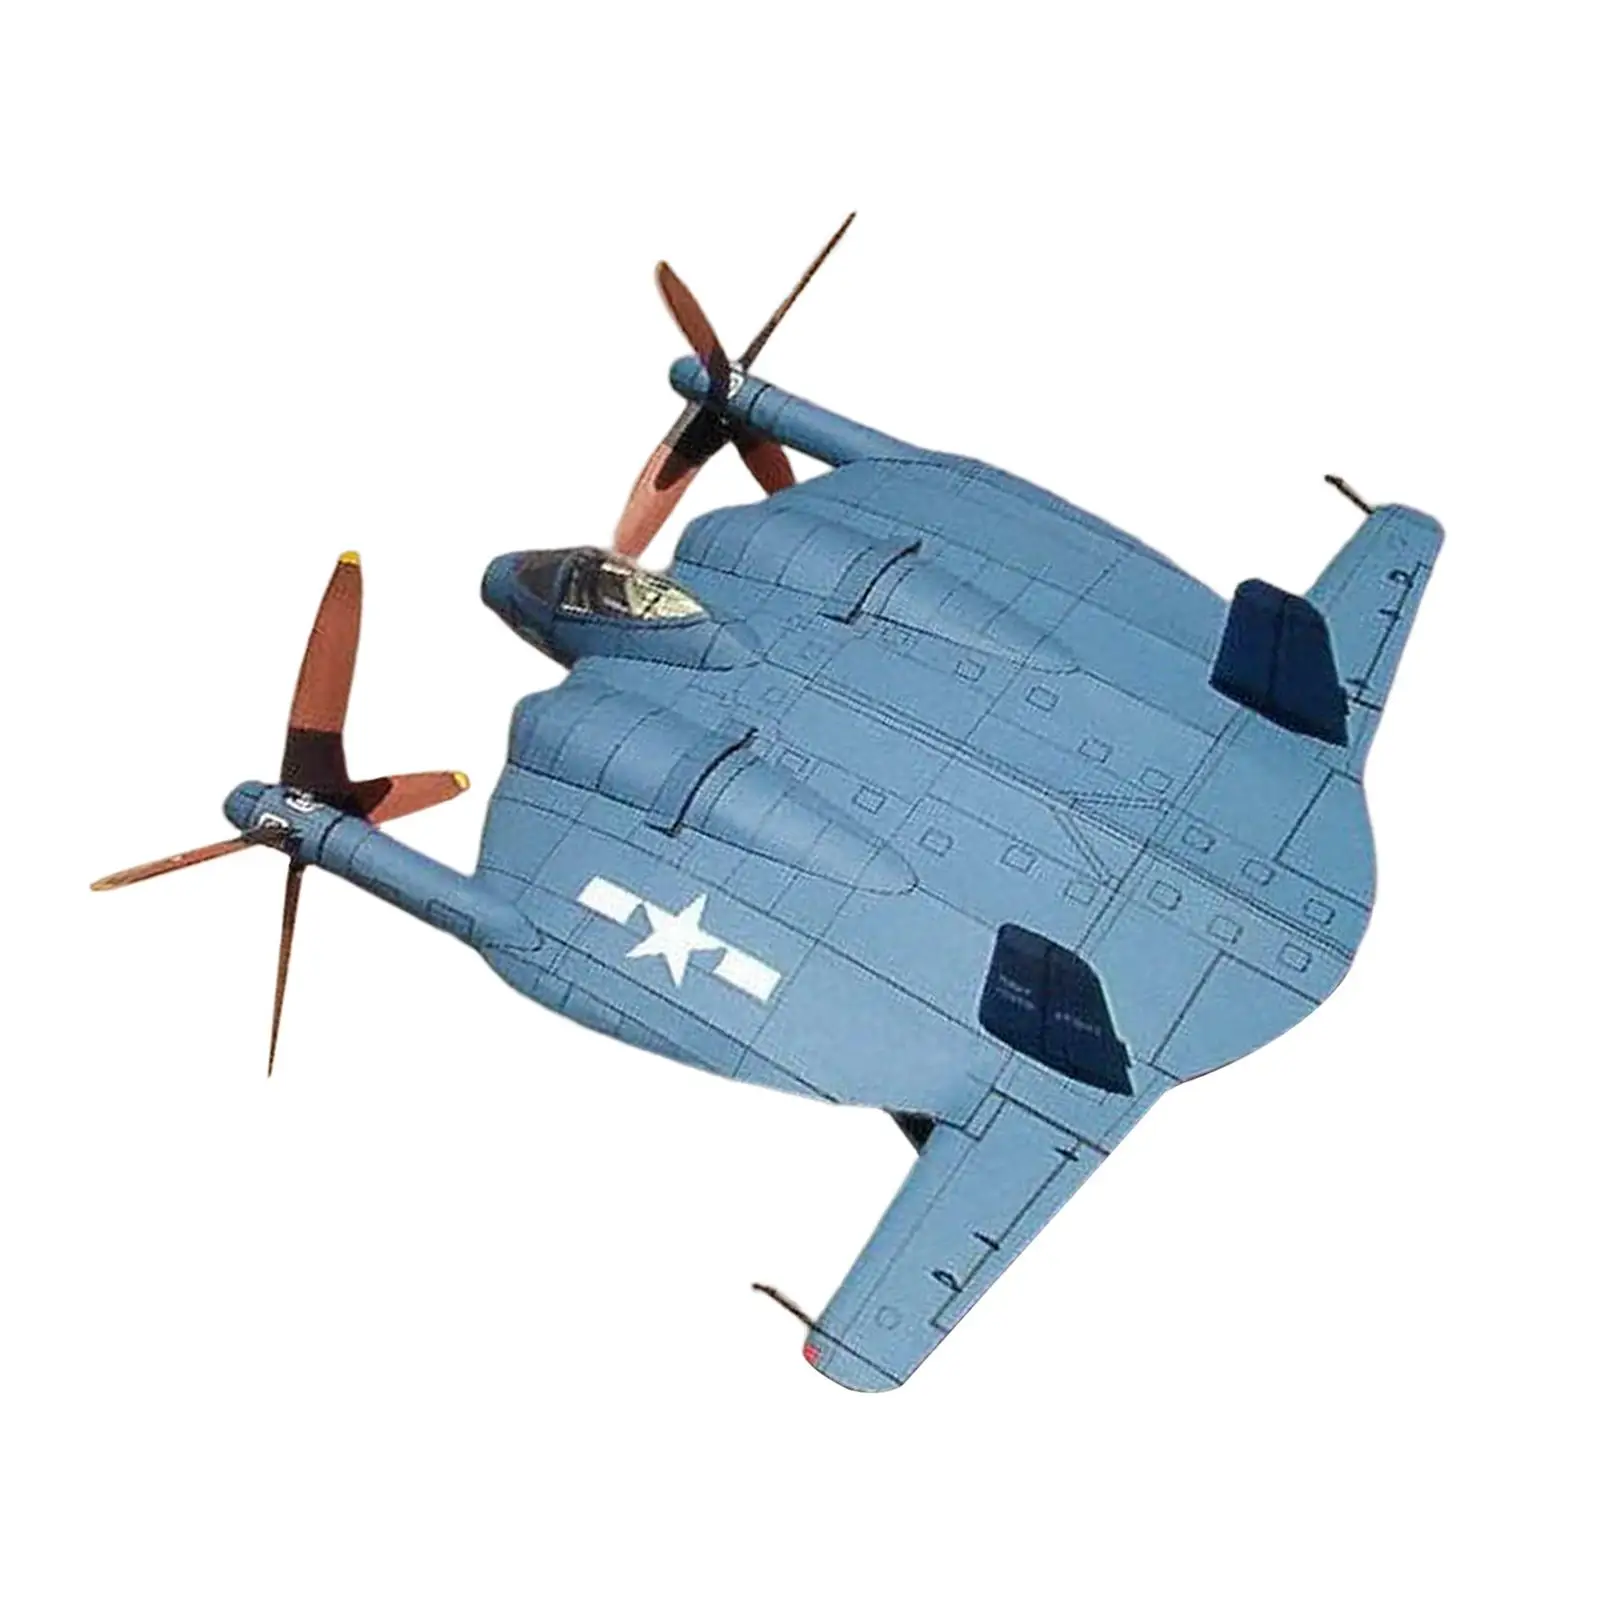 DIY Assemble Fighter Model Toy Aircraft Paper Model Papercraft for Desk Home